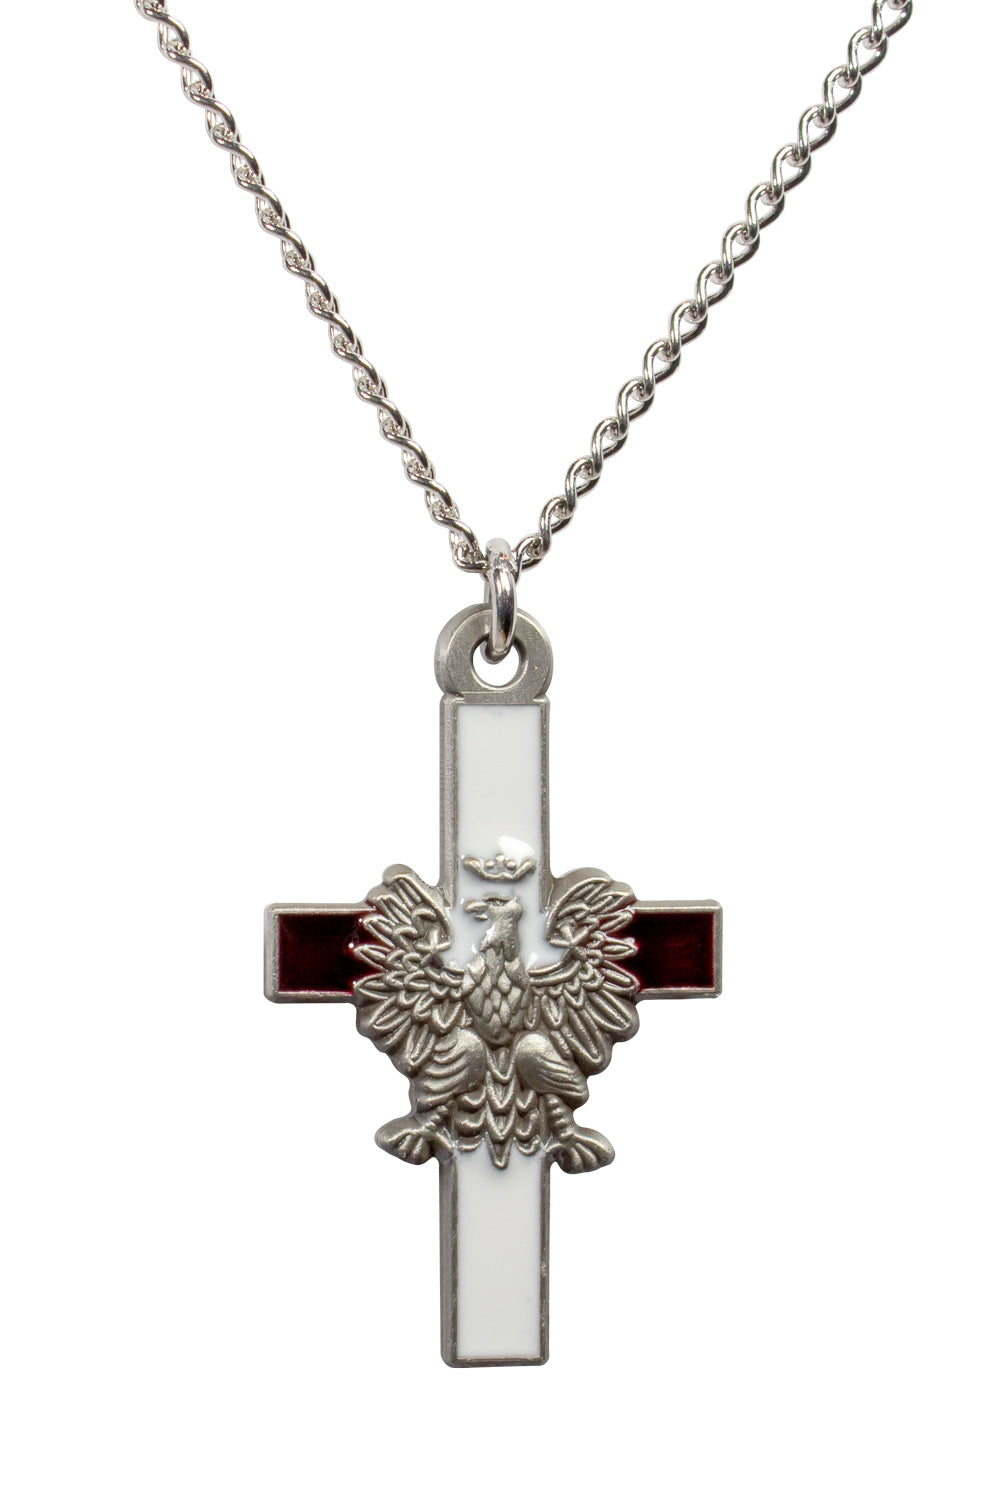 Necklace - Antique Silver White Eagle Cross, Deep Red & White